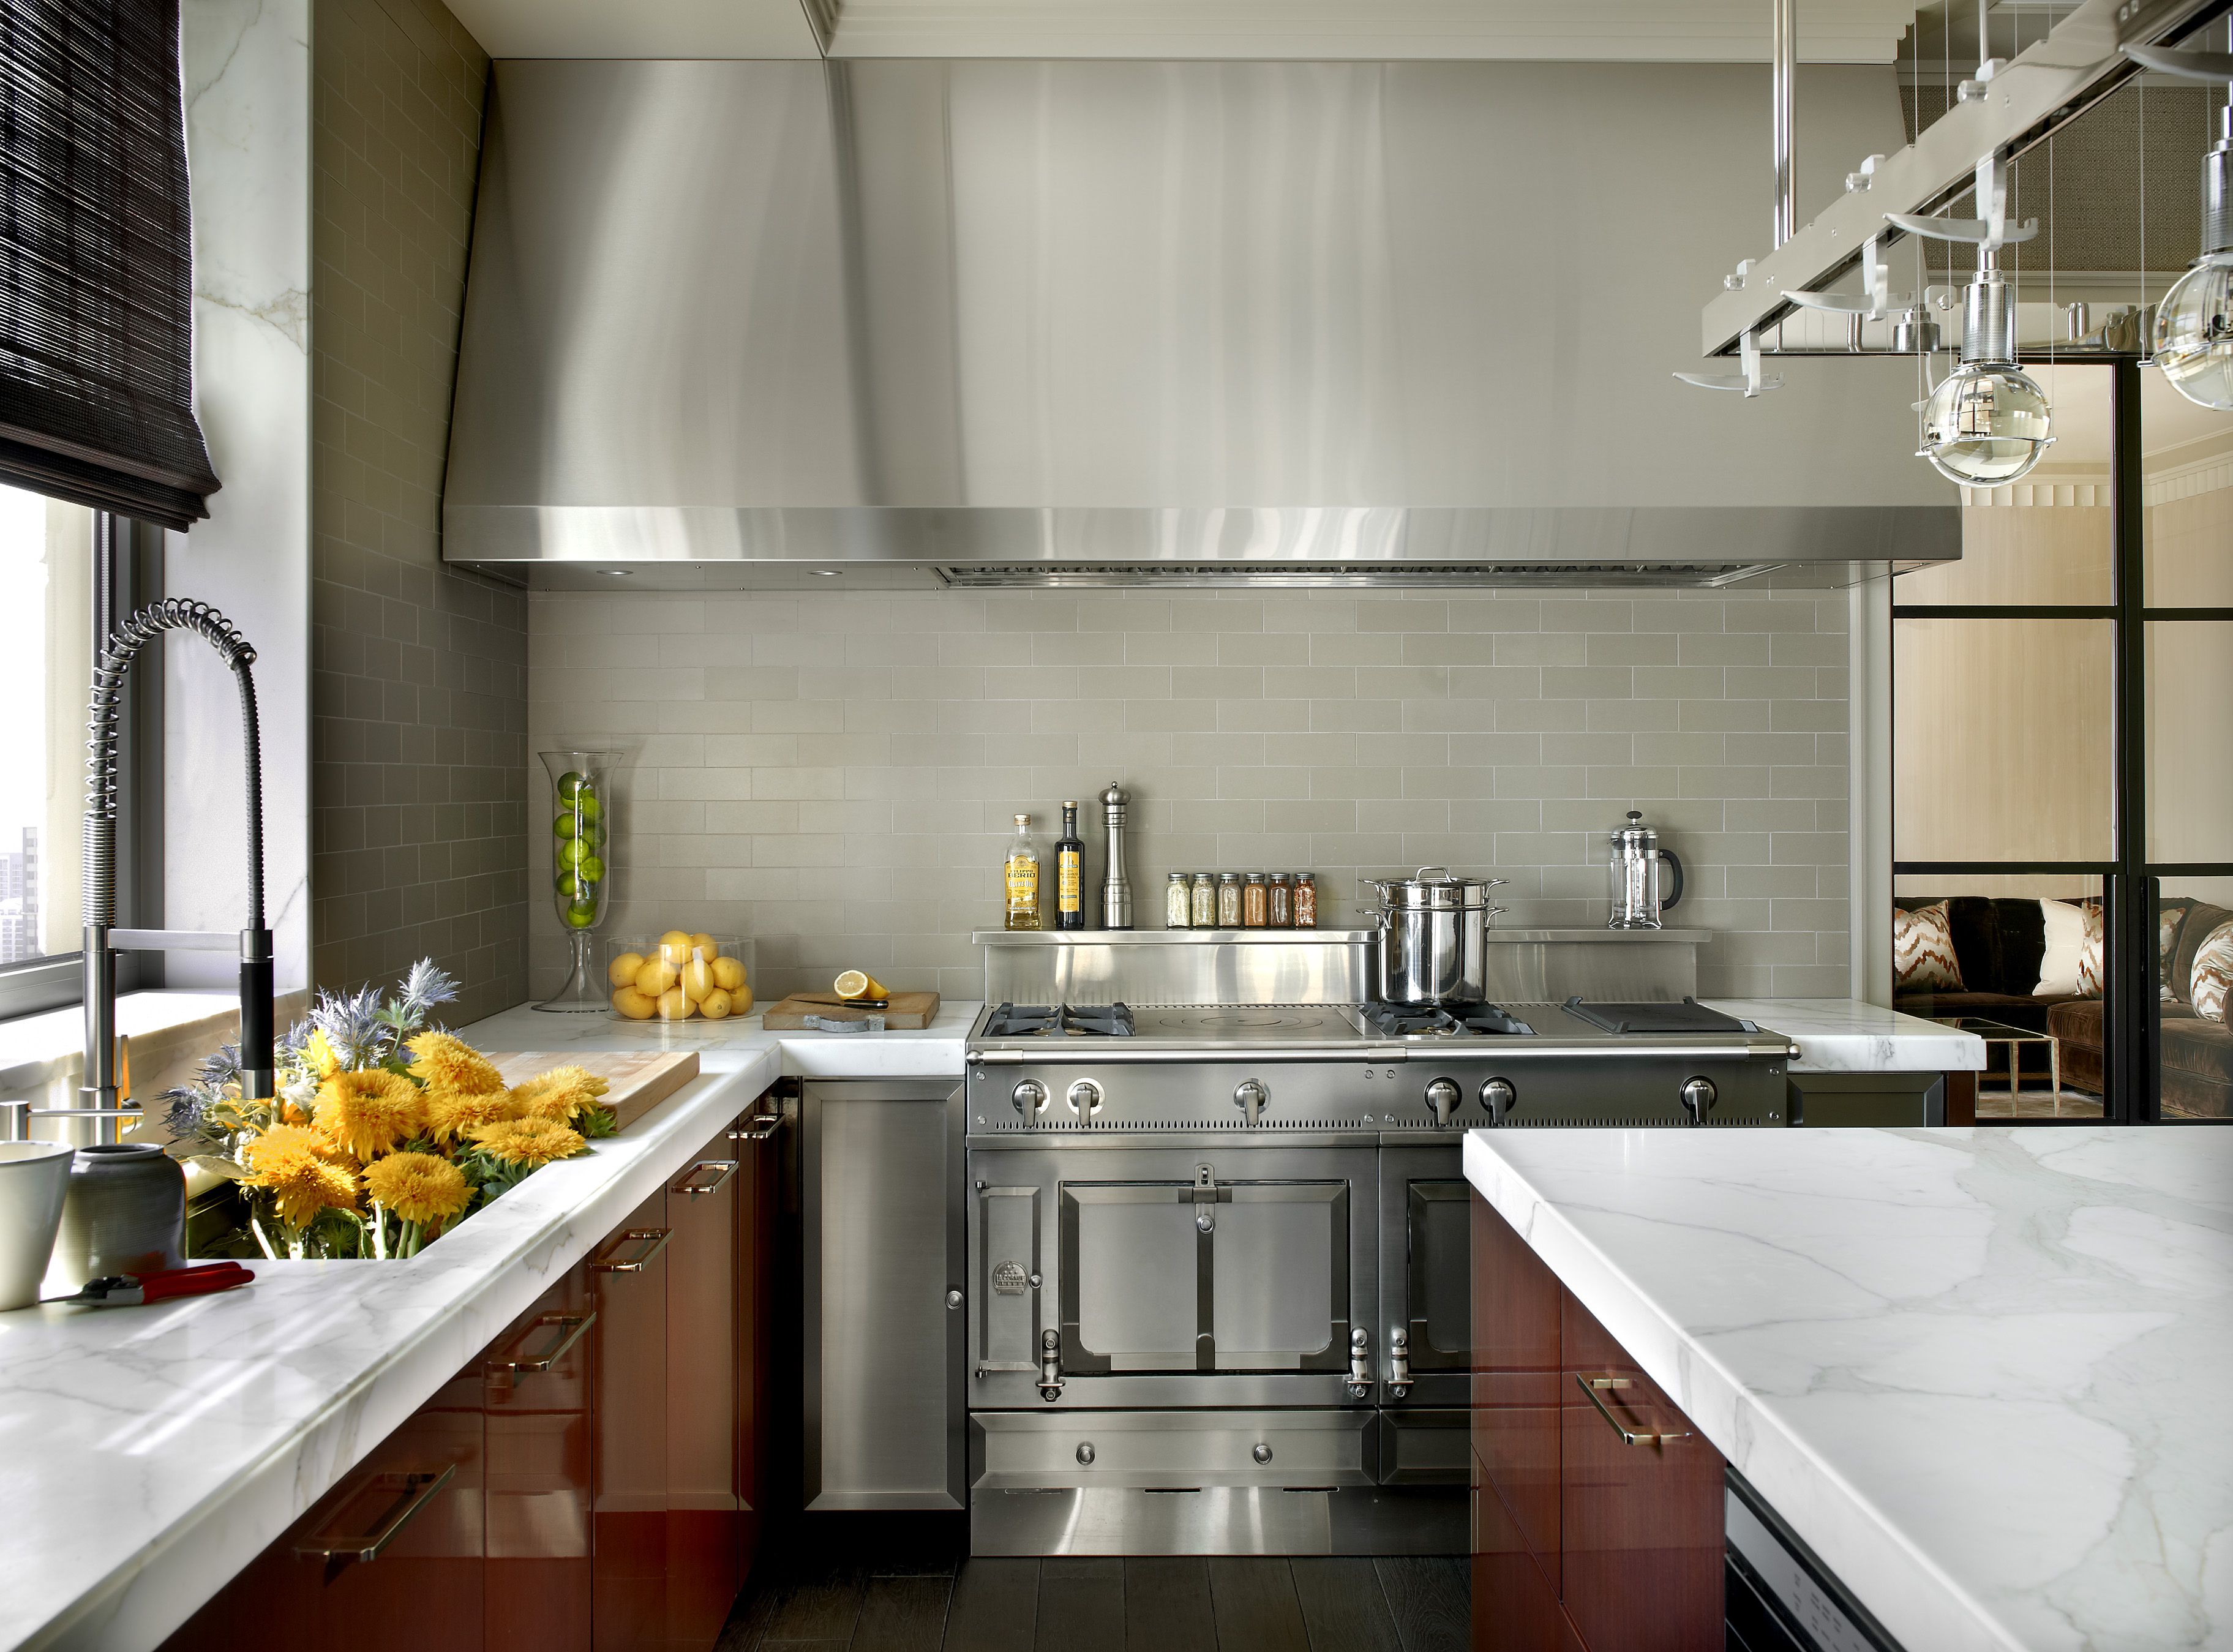 Design Styles for Kitchens